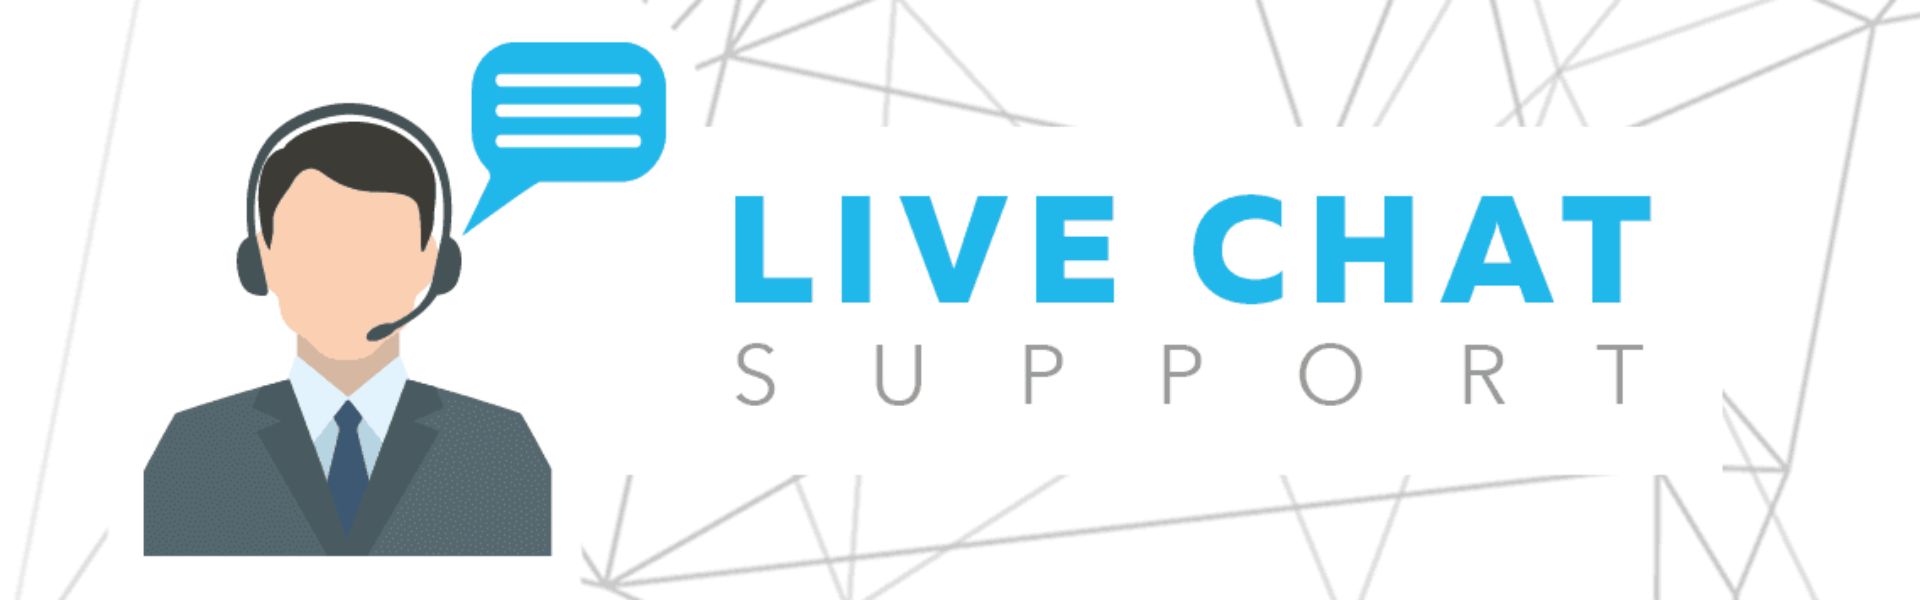 Implement Live Chat Support